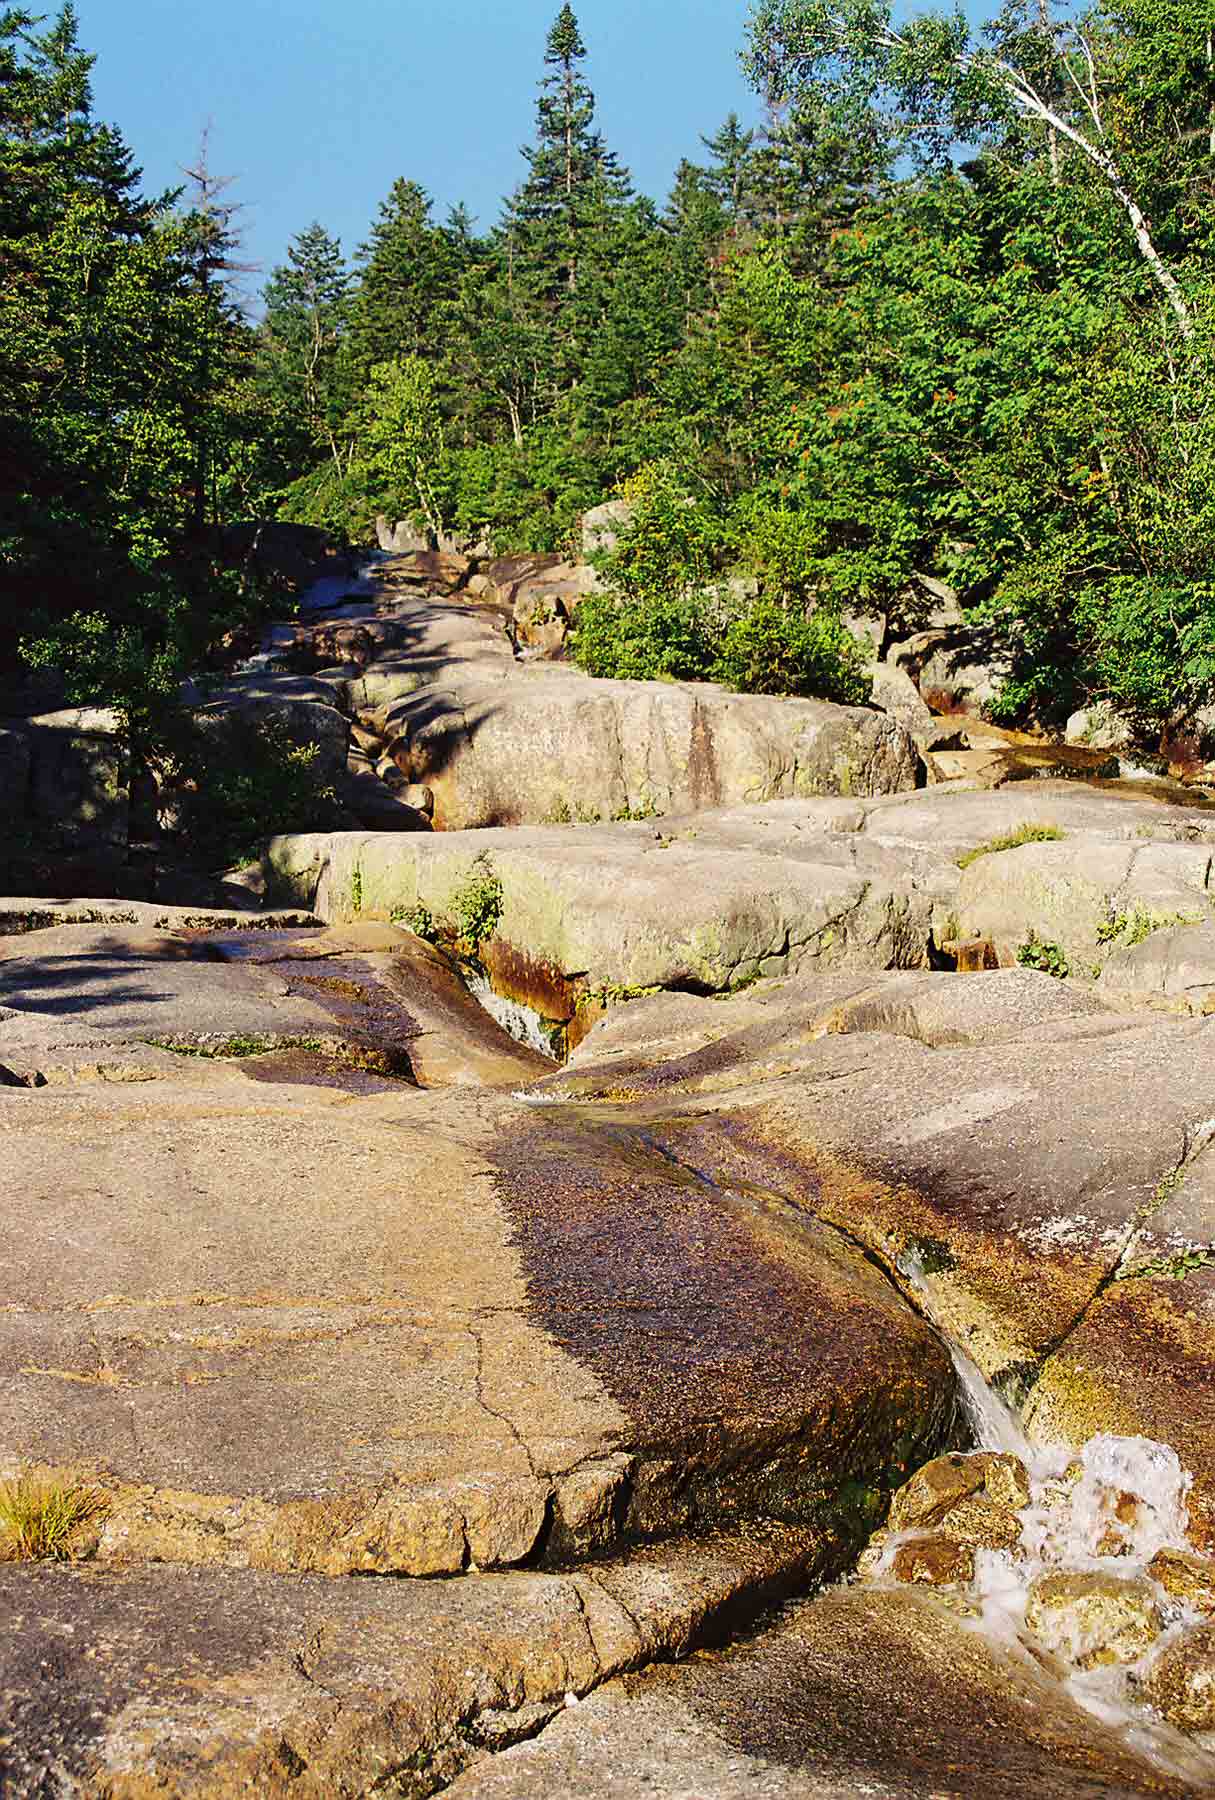 Cascades along Whitewall Brook which is just a few feet from Zealand Hut. Courtesy dlcul@conncoll.edu